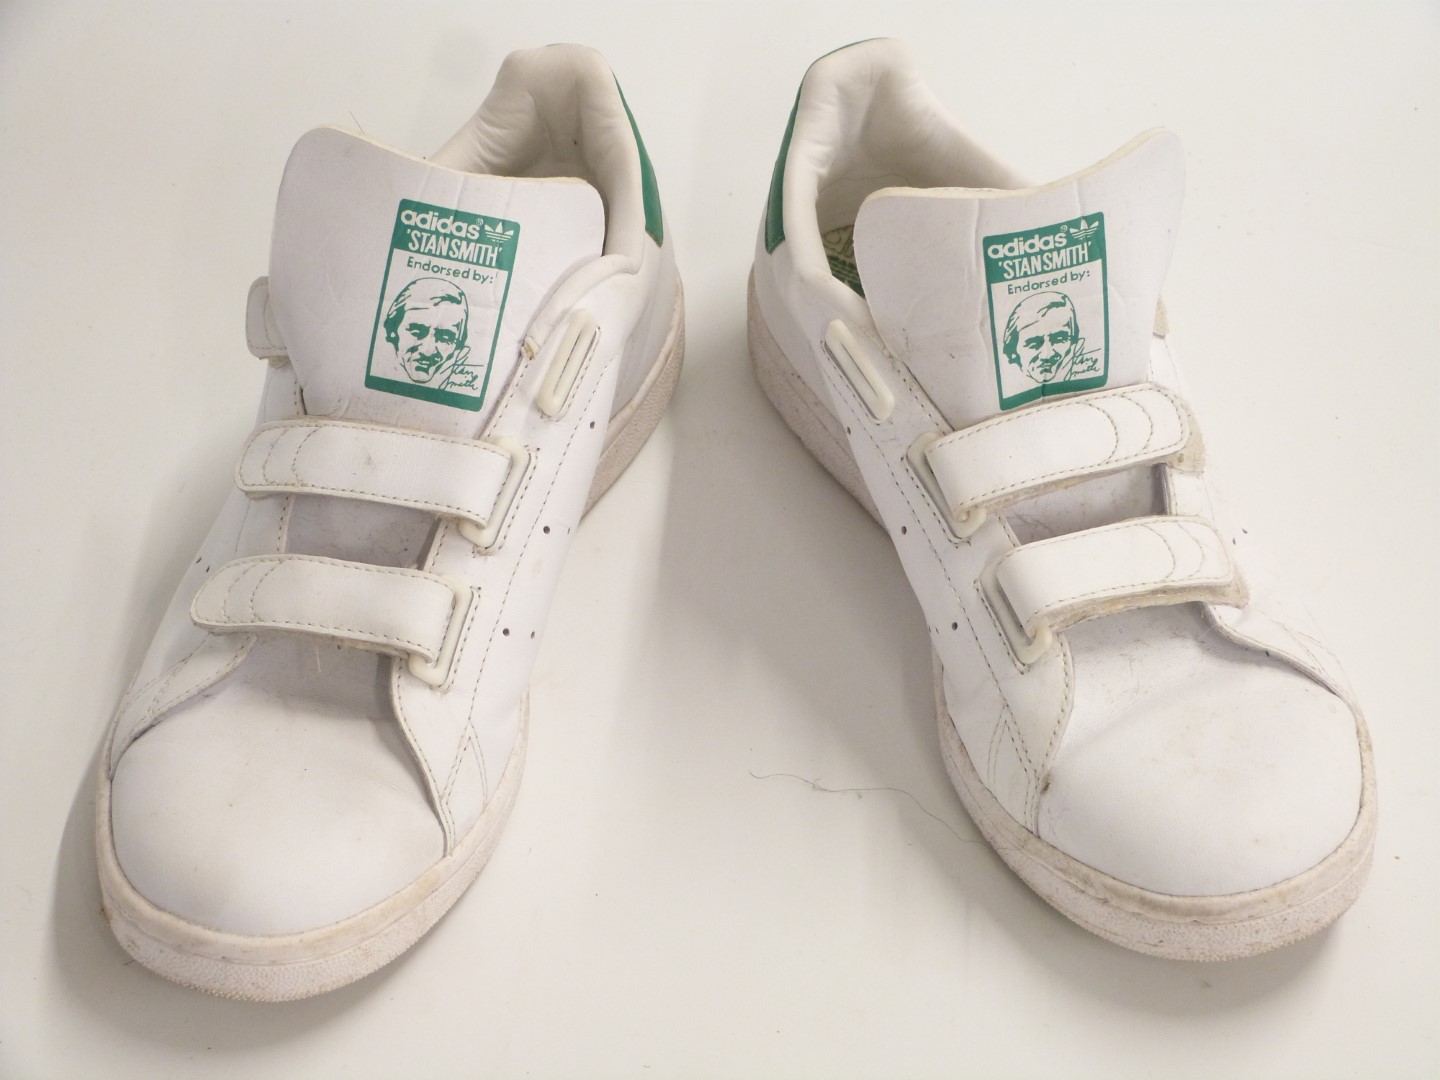 Five pairs of Addias trainers including Superstar (UK 5), white and green Stan Smith (UK 9.5), - Image 2 of 6